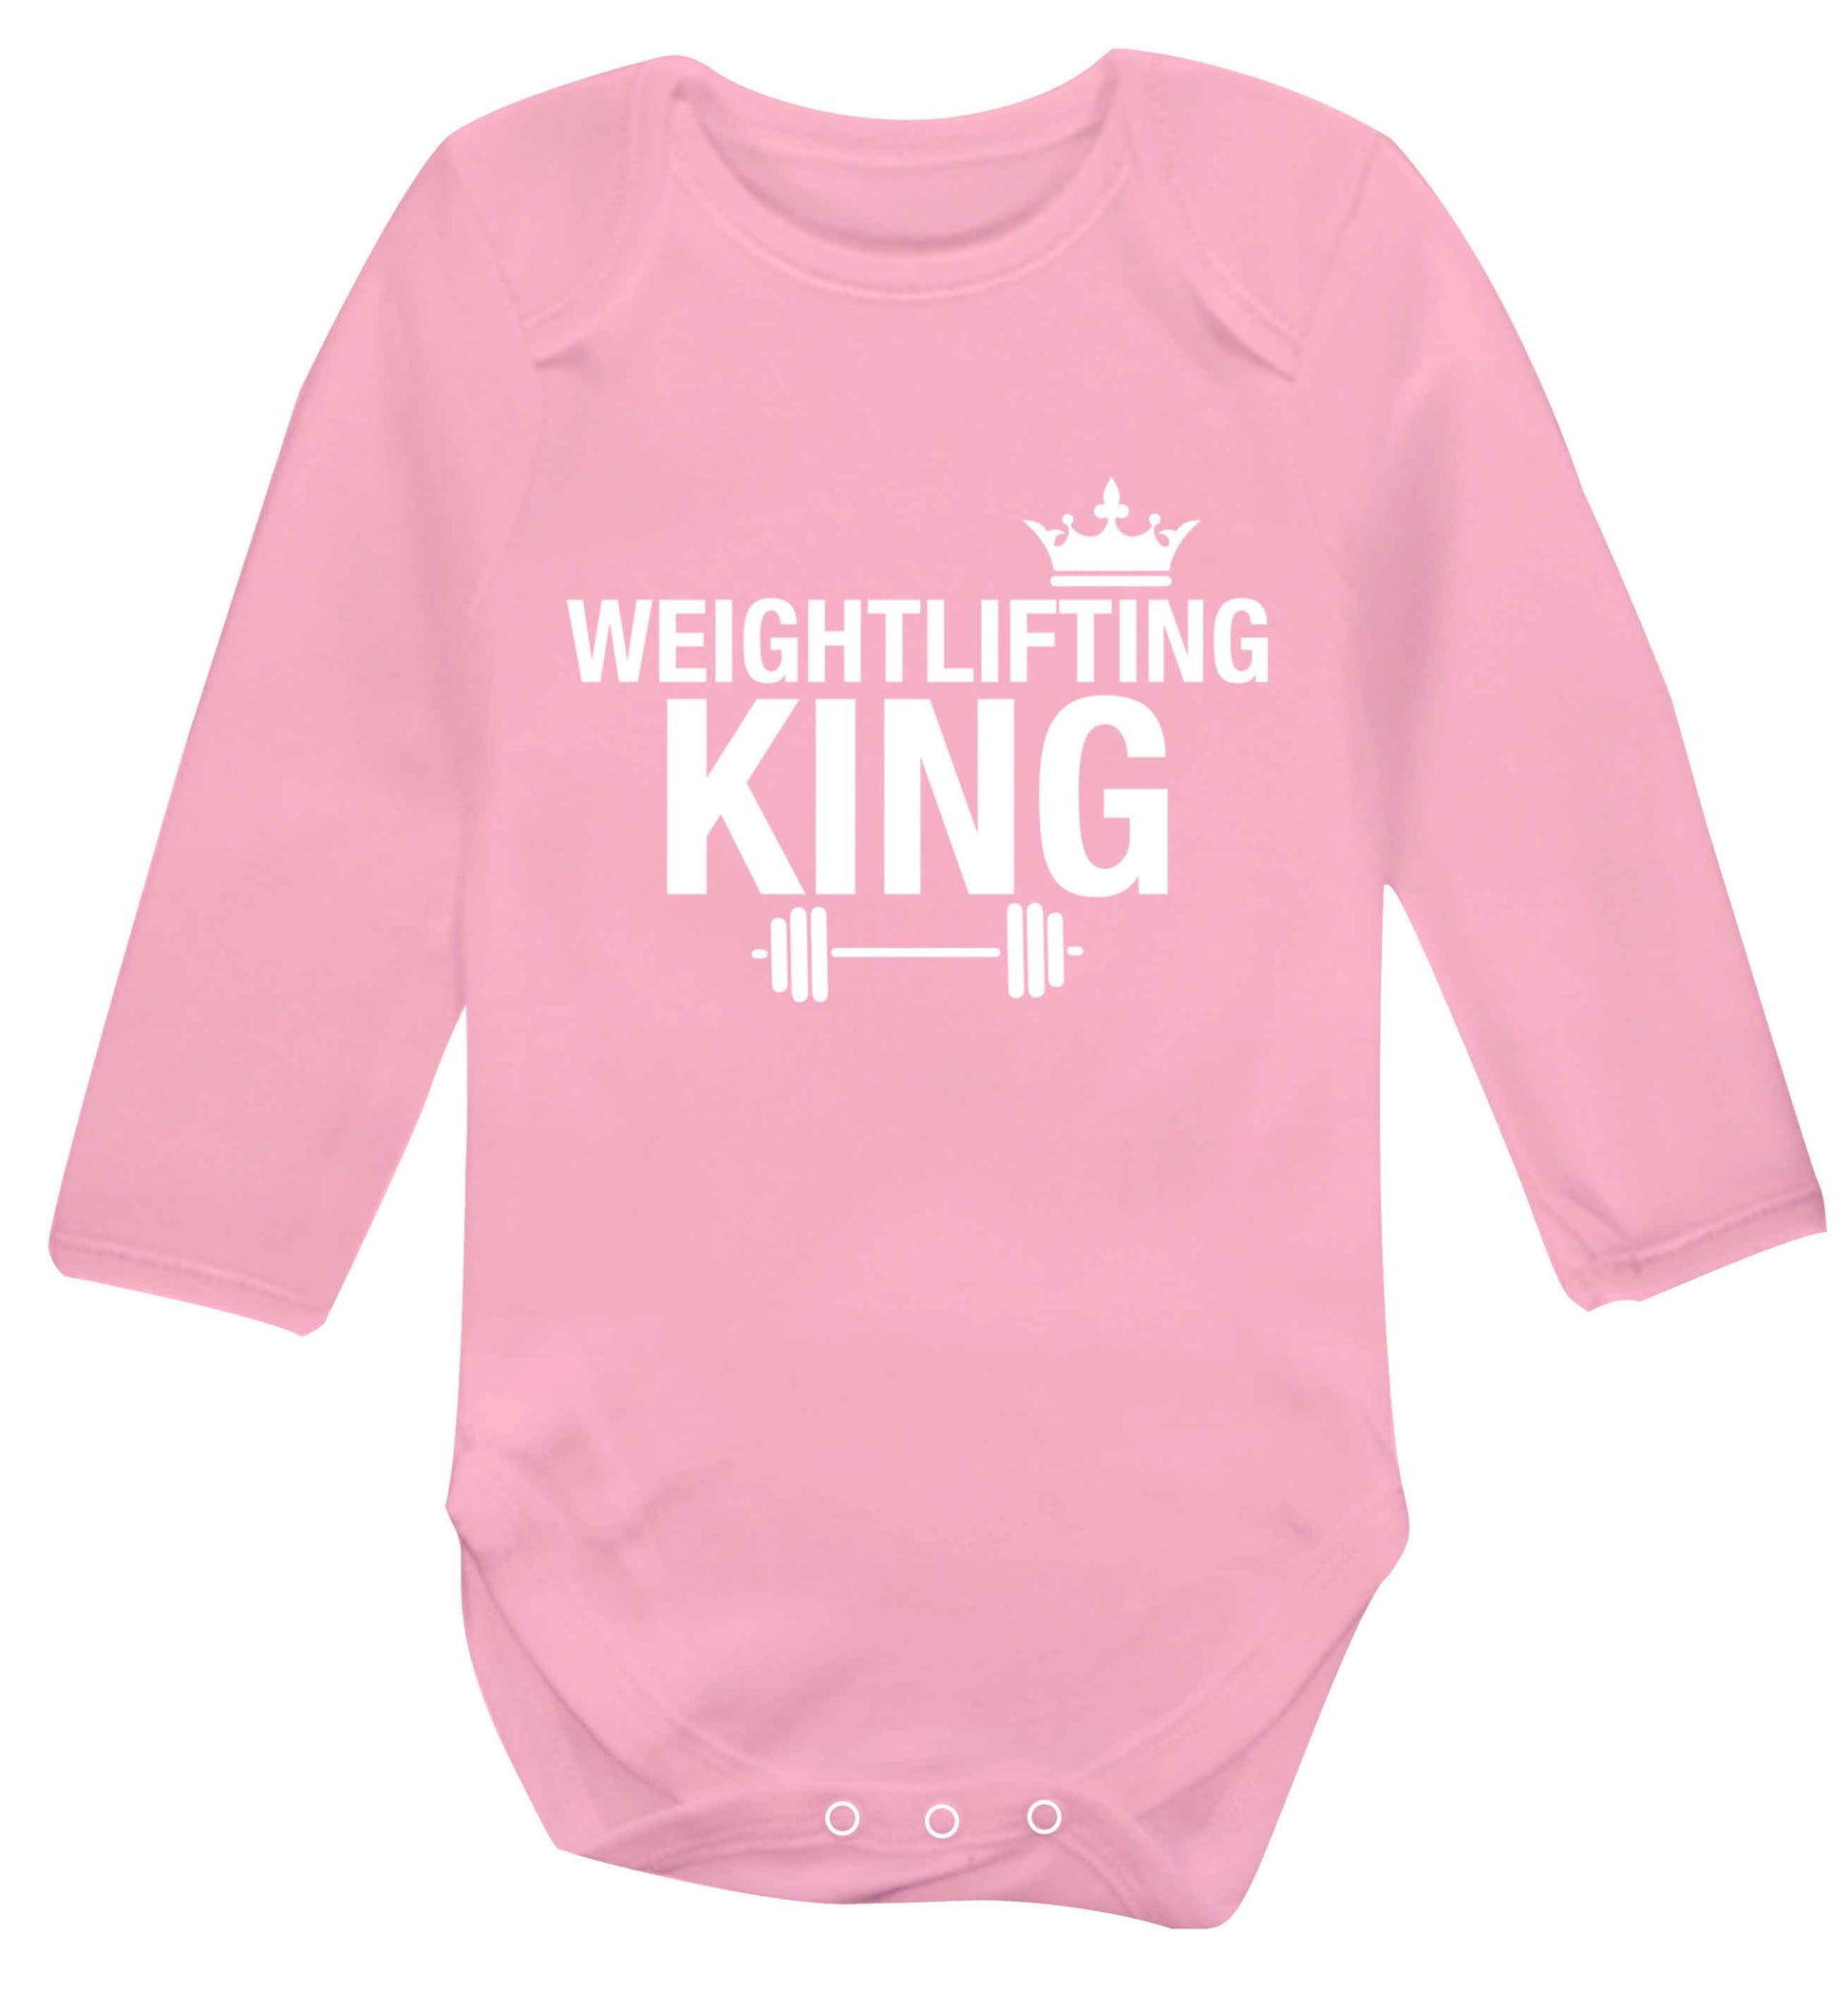 Weightlifting king Baby Vest long sleeved pale pink 6-12 months